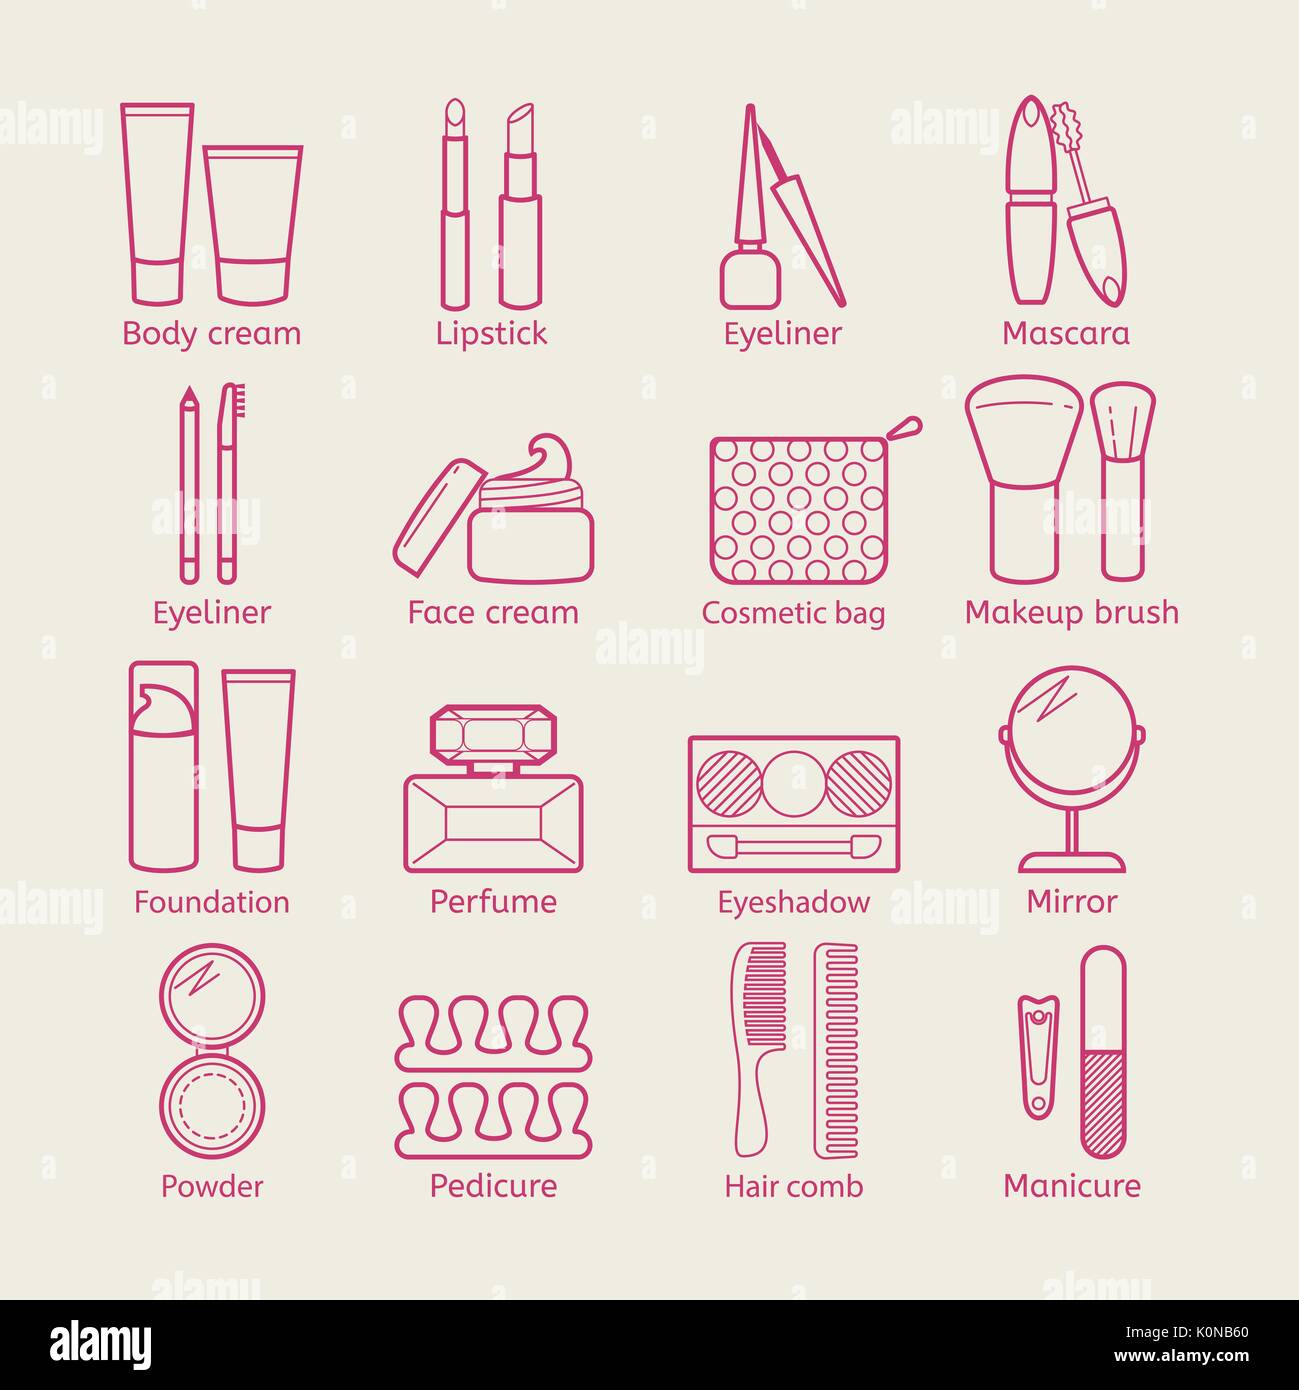 Vector cosmetic icons. Mascara, lipstick, powder, eye shadow, perfume, cream and other make-up items. Makeup thin linear signs for manicure, pedicure and Visage. Stock Vector